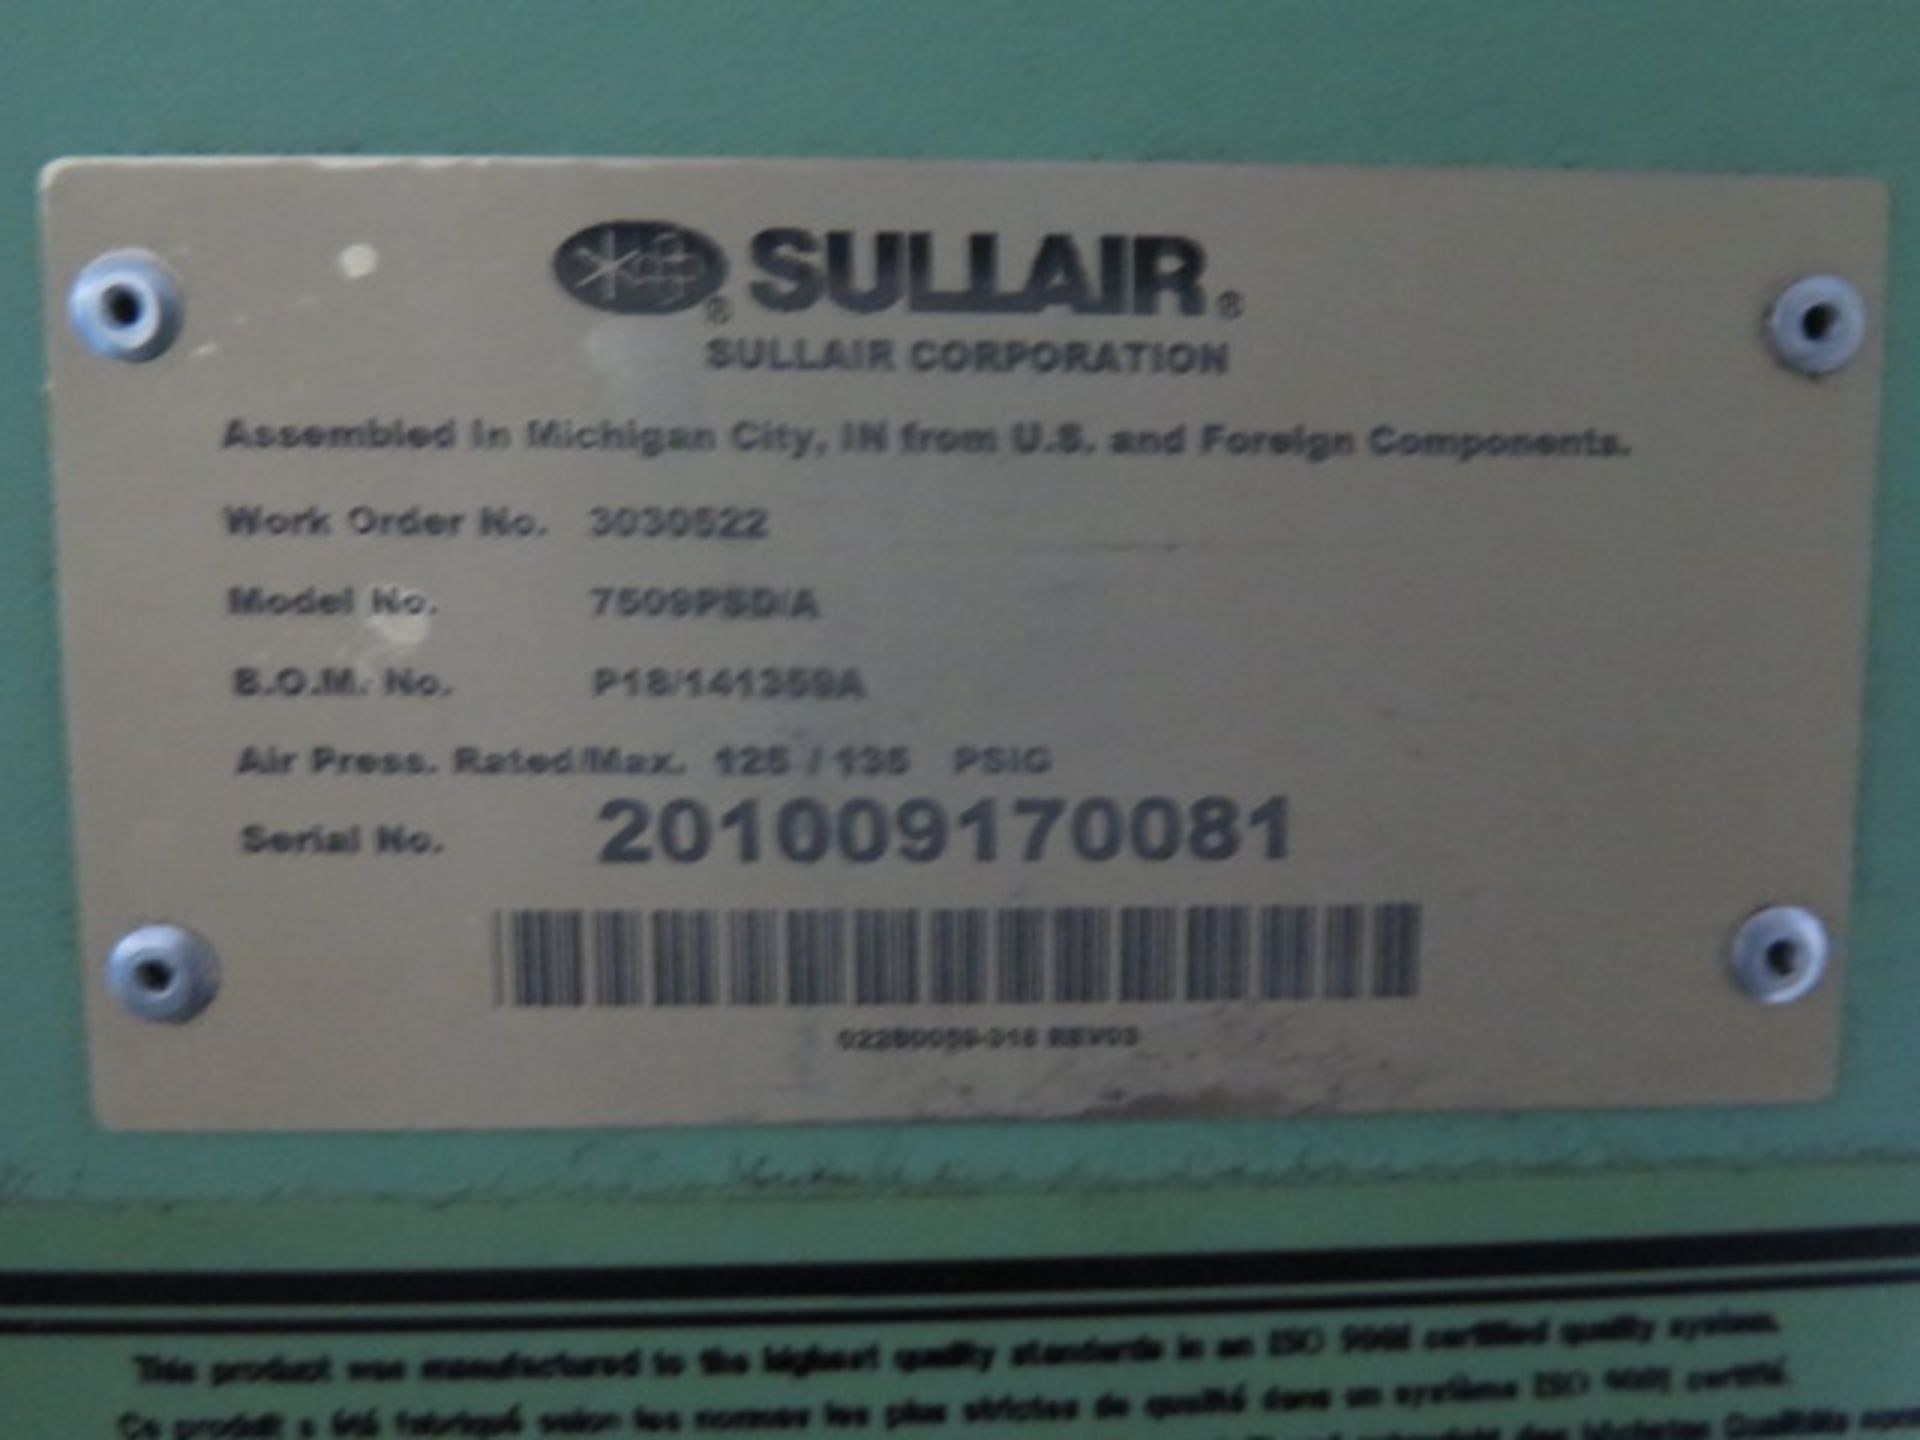 Sullair 7500PSD/A 100Hp Rotary Air Compressor s/n 201009170081 w/ Digital Controls (SOLD AS-IS - - Image 7 of 7